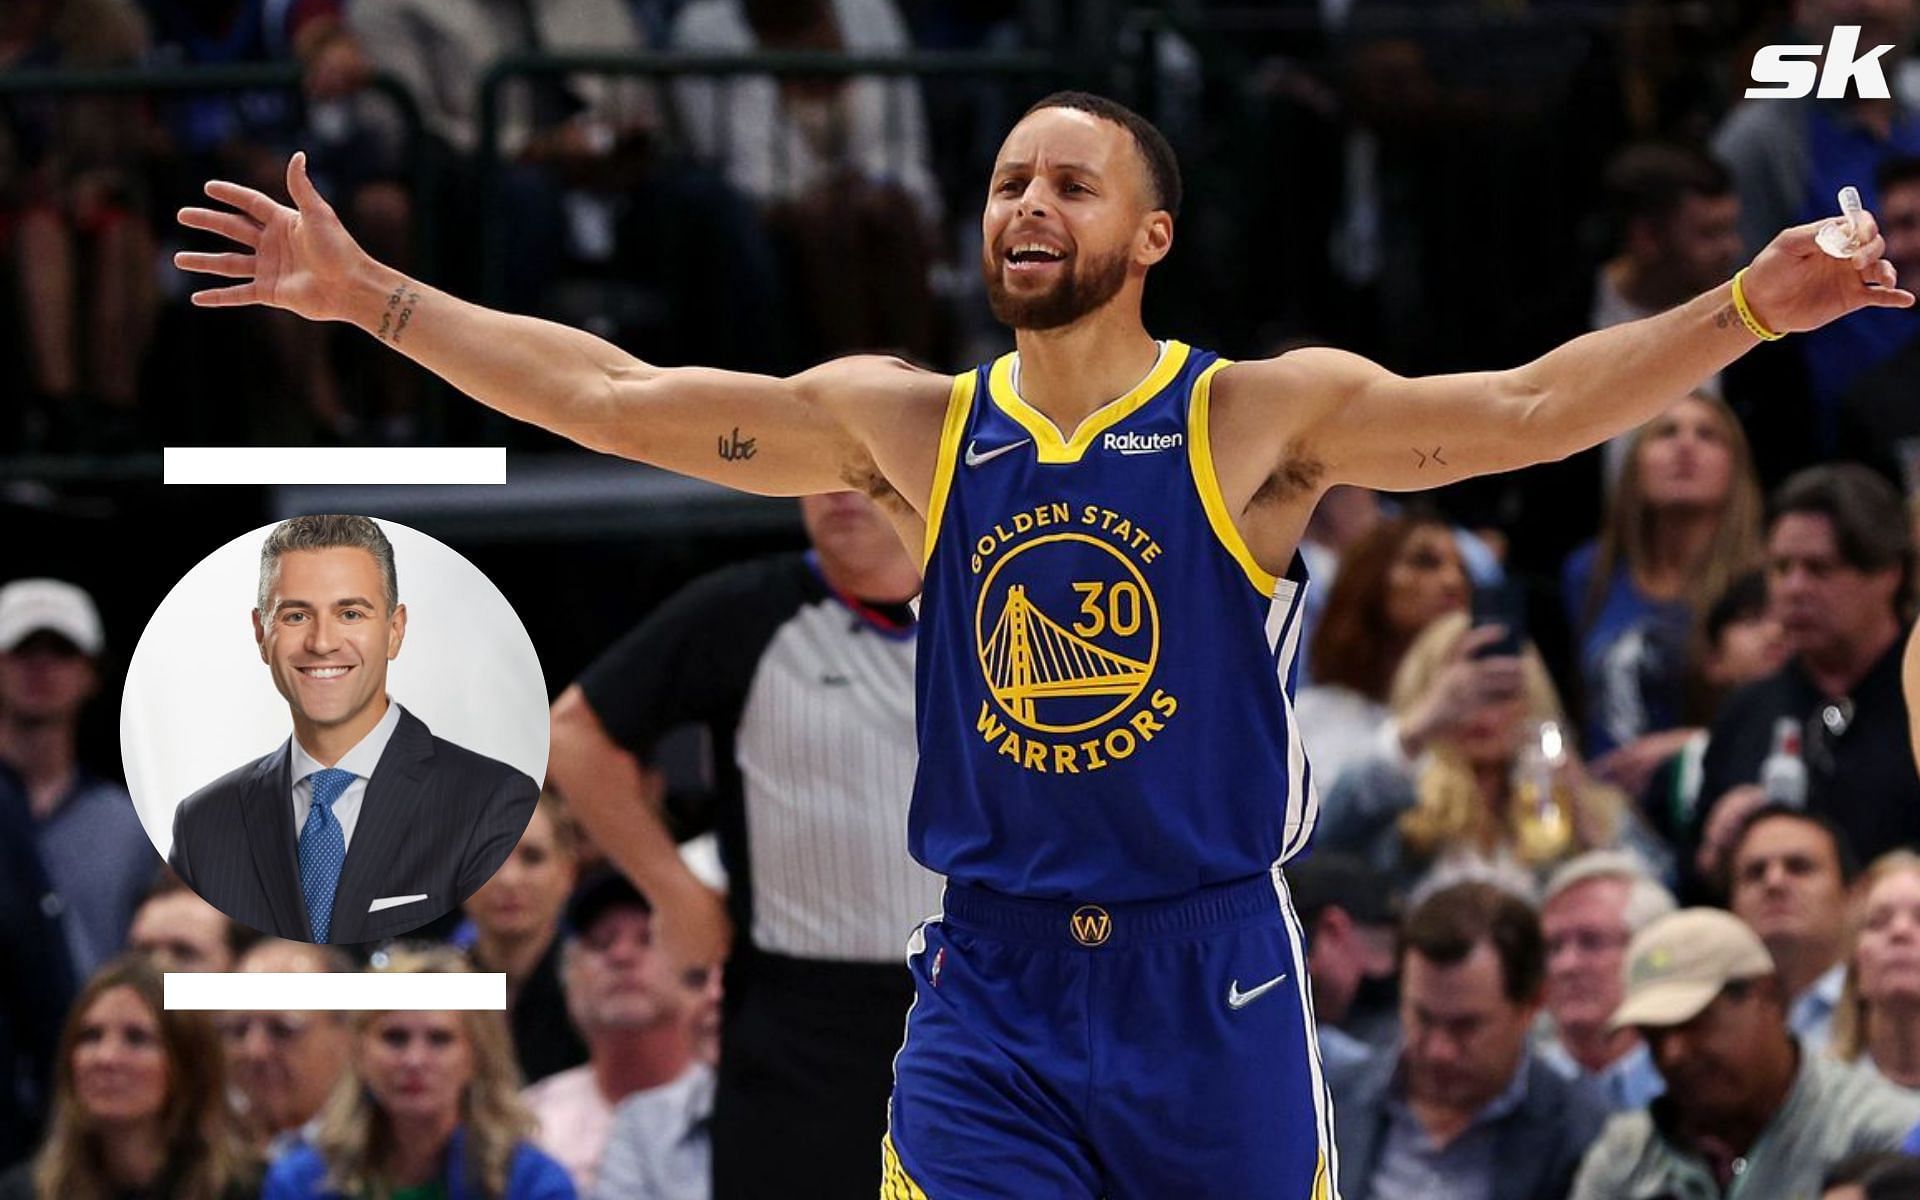 Steph Curry led the Golden State Warriors to a dominant Game 2 win in the 2022 NBA Finals